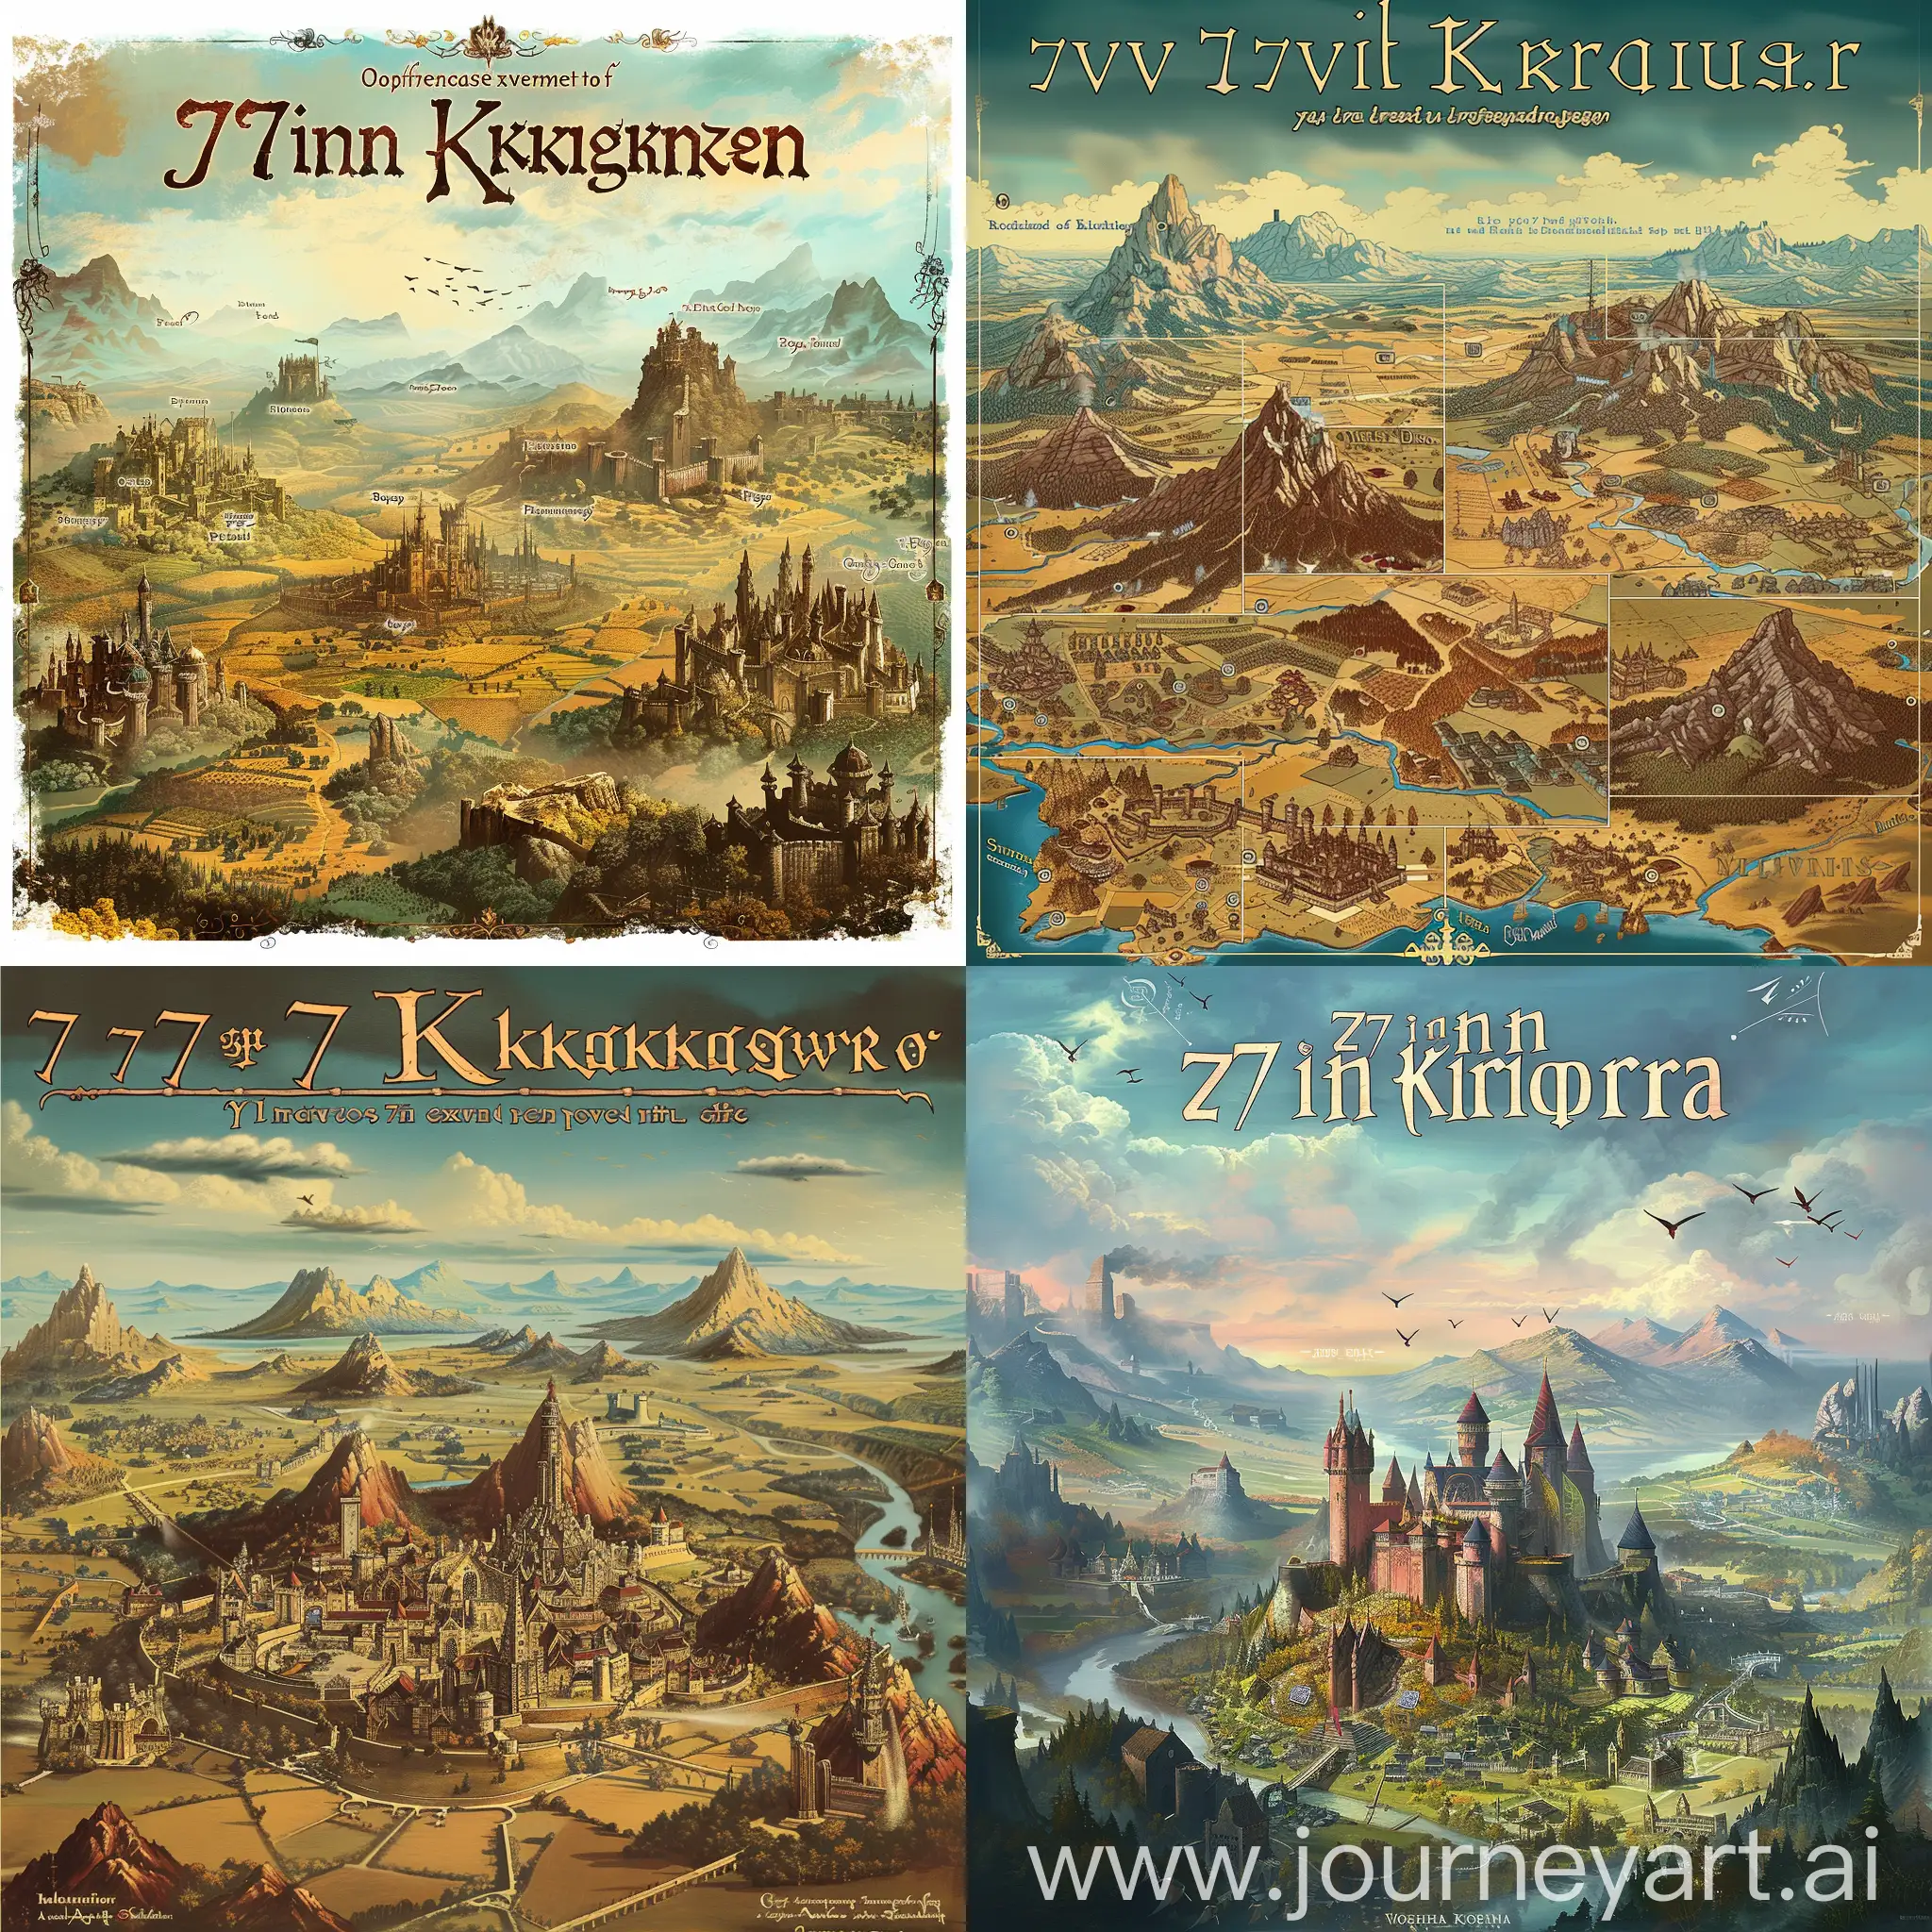 Long ago, the Seven Kingdoms were unified under a single ruler, but power struggles eventually split them into seven separate kingdoms. Each of these kingdoms had its own king or queen, and often wars broke out between them for control of land and resources.  Among the Seven Kingdoms were fertile lands, rugged mountains, mysterious forests, and stretches of barren desert. Each kingdom had its own culture, traditions and legends.  Over the centuries, alliances have formed and fallen, dynasties have prospered and faded, and wars have been fought and won. The great houses of the Seven Kingdoms competed for power and influence, sometimes at the cost of peace and stability.  But while political struggles and court intrigue often dominated the stories of the Seven Kingdoms, there were also darker threats looming over this world. Evil creatures, corrupt wizards, and armies of the undead have at times threatened the fragile balance of life in the realms.